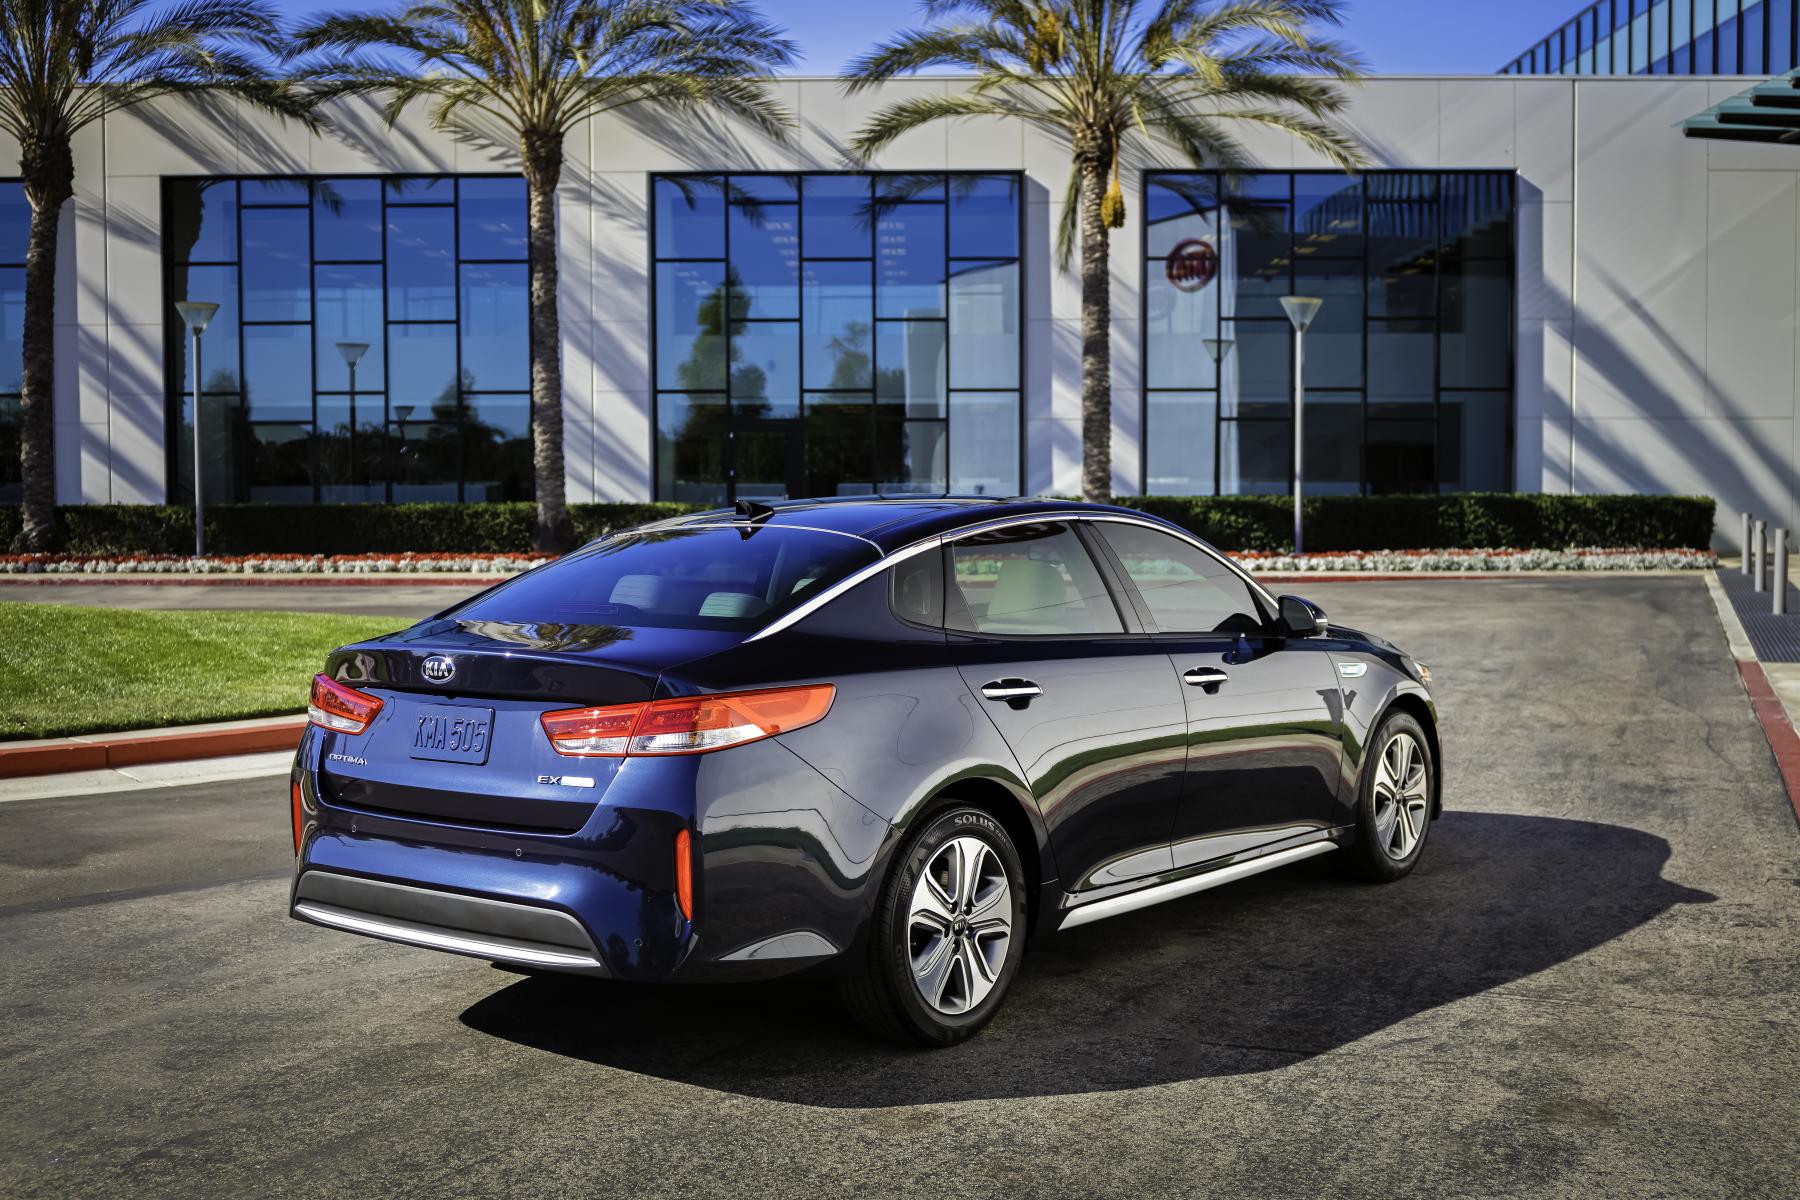 2017 Kia Optima Hybrid Unveiled with More Compact Battery and 2-Liter ...